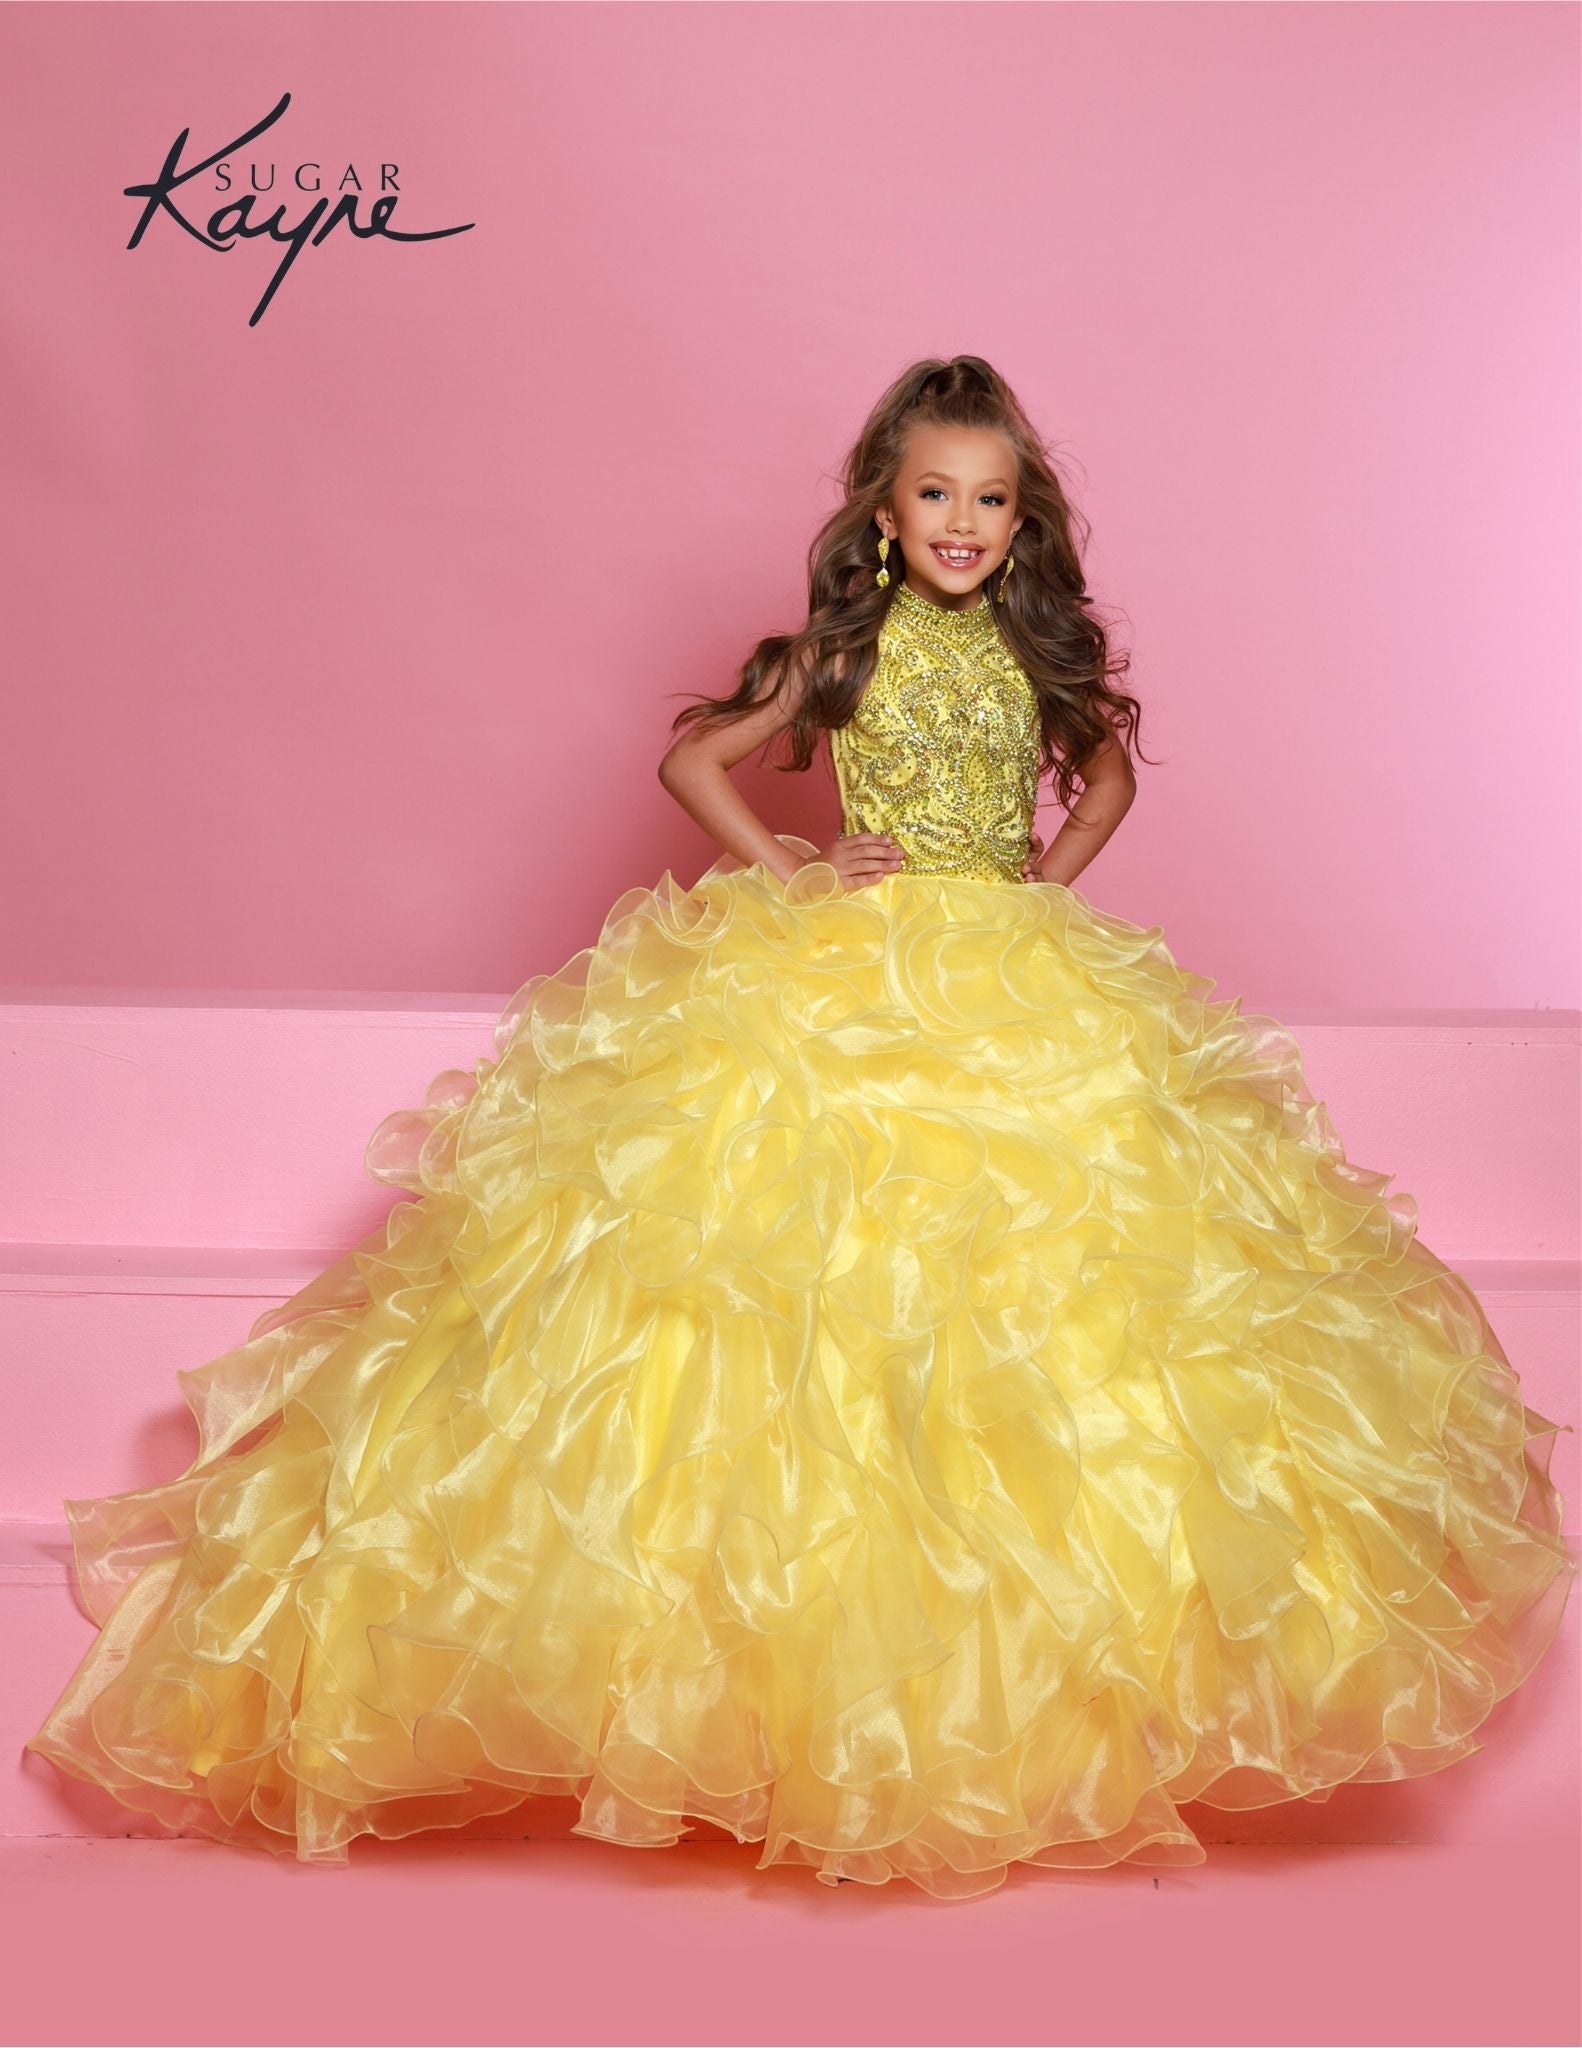 Sugar Kayne C305 Size 8, 12 Barbie Pink Ruffled Layers Girls Preteens  Pageant Dress Ball Gown Cape Halter Formal Dress